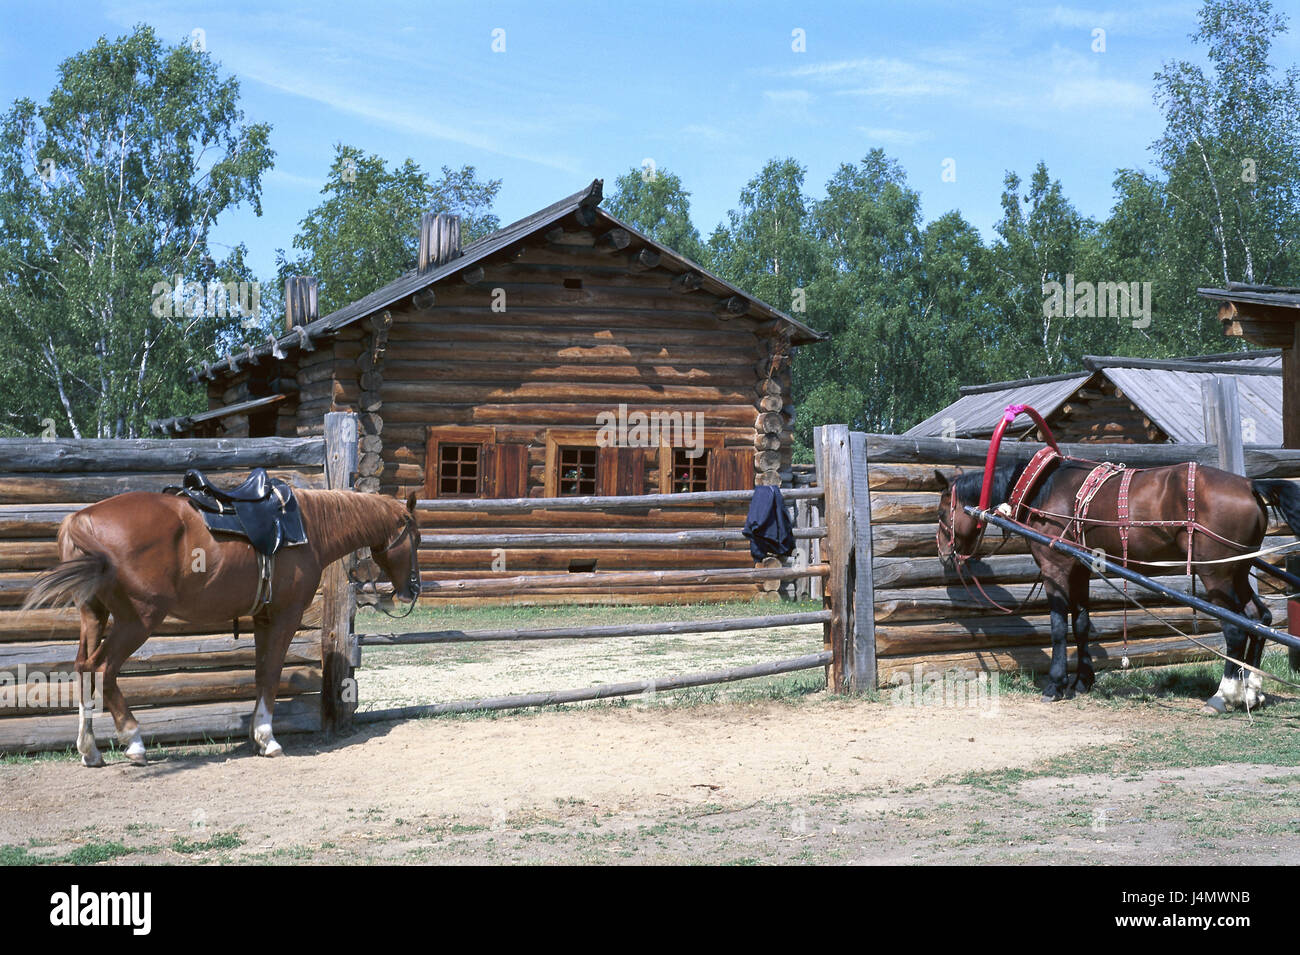 Russia, Siberia, Irkutsk, open-air museum of Taltsy, wooden fence, riding horse, carriage Ostsibirien, Talysij, museum village, fort, museum of Wooden Architecture, fence, horses, bound, architecture, destination, place of interest Stock Photo